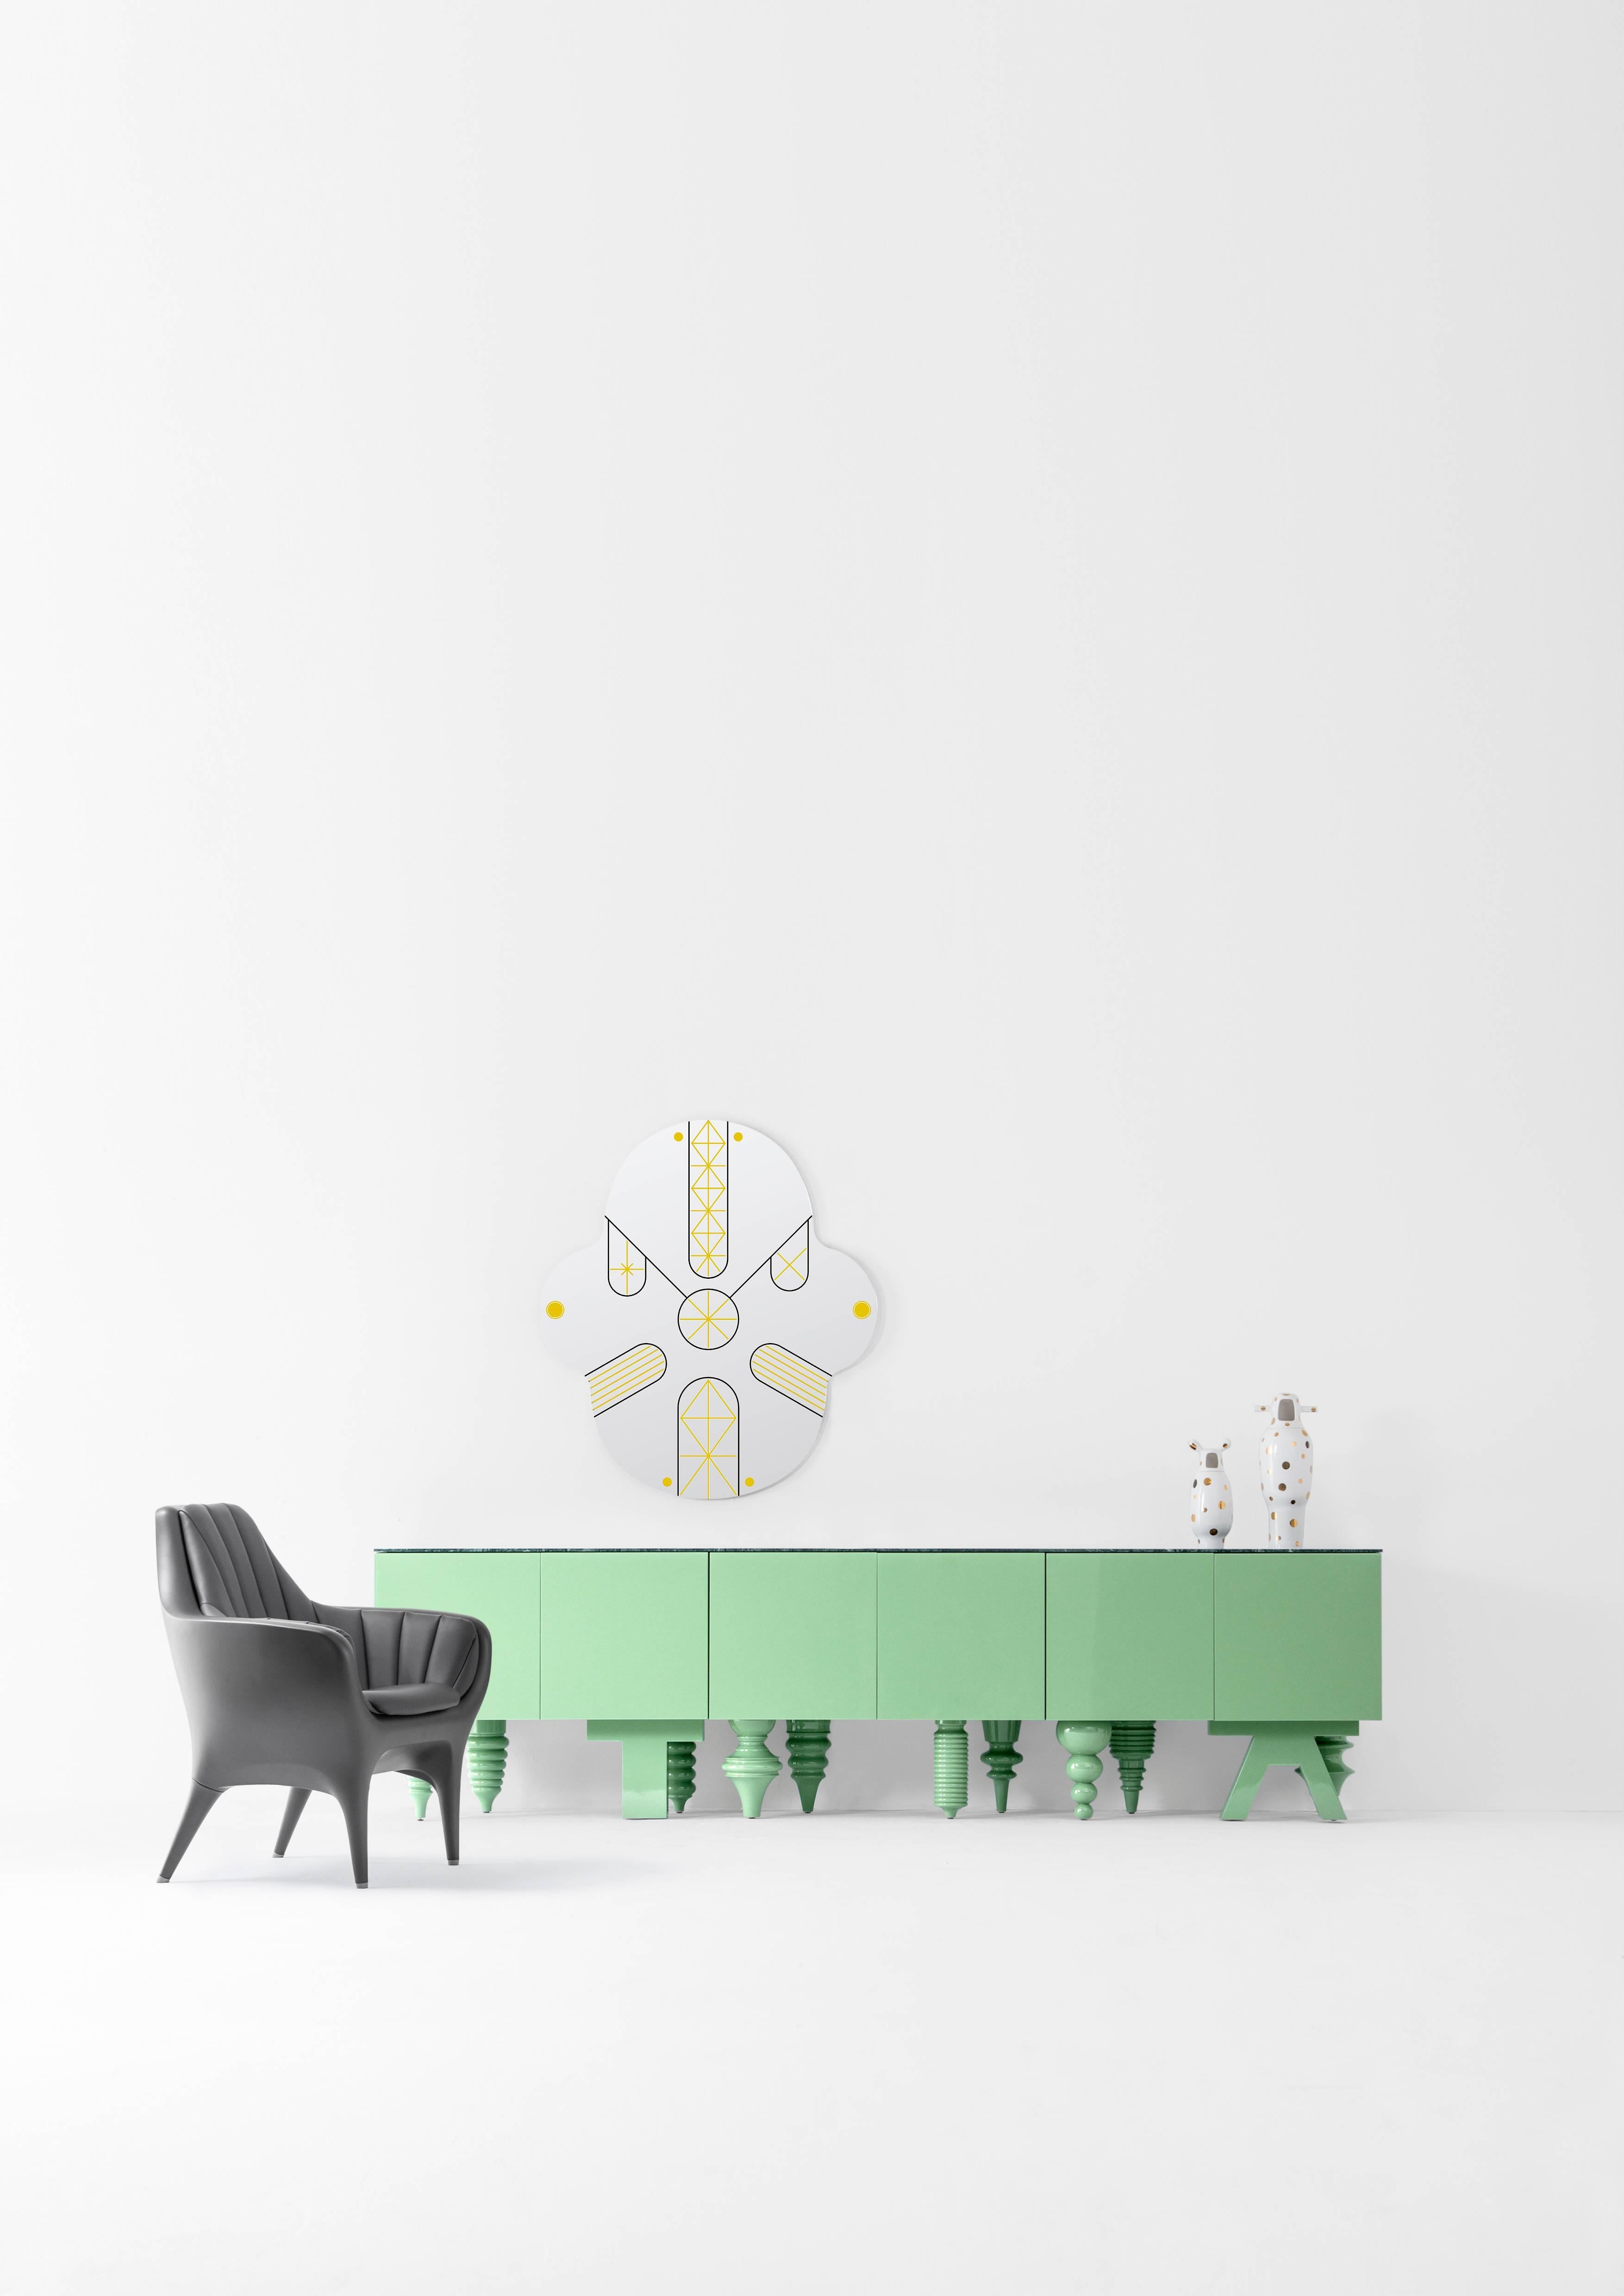 Jaime Hayon cabinet green multileg cabinet designed in 2016 and manufactured by BD Barcelona.

A modular multipurpose and multi-legged furniture. It is available with a dozen different designs inspired by different styles. It allows various